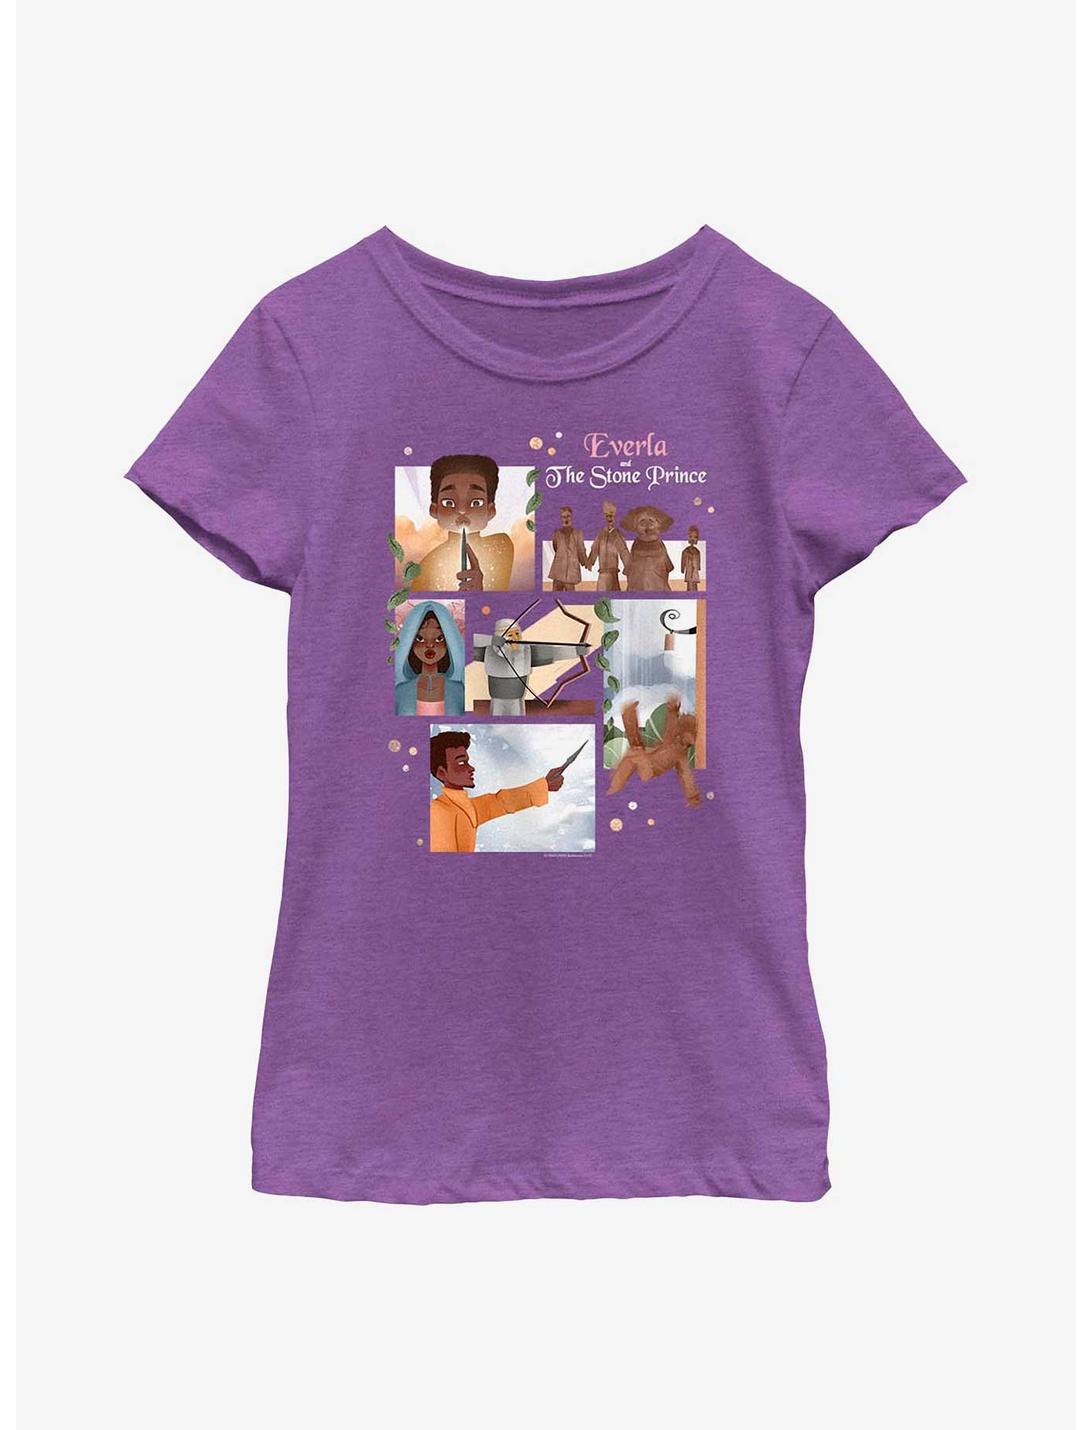 Anboran Everla and the Stone Prince Youth Girls T-Shirt, PURPLE BERRY, hi-res